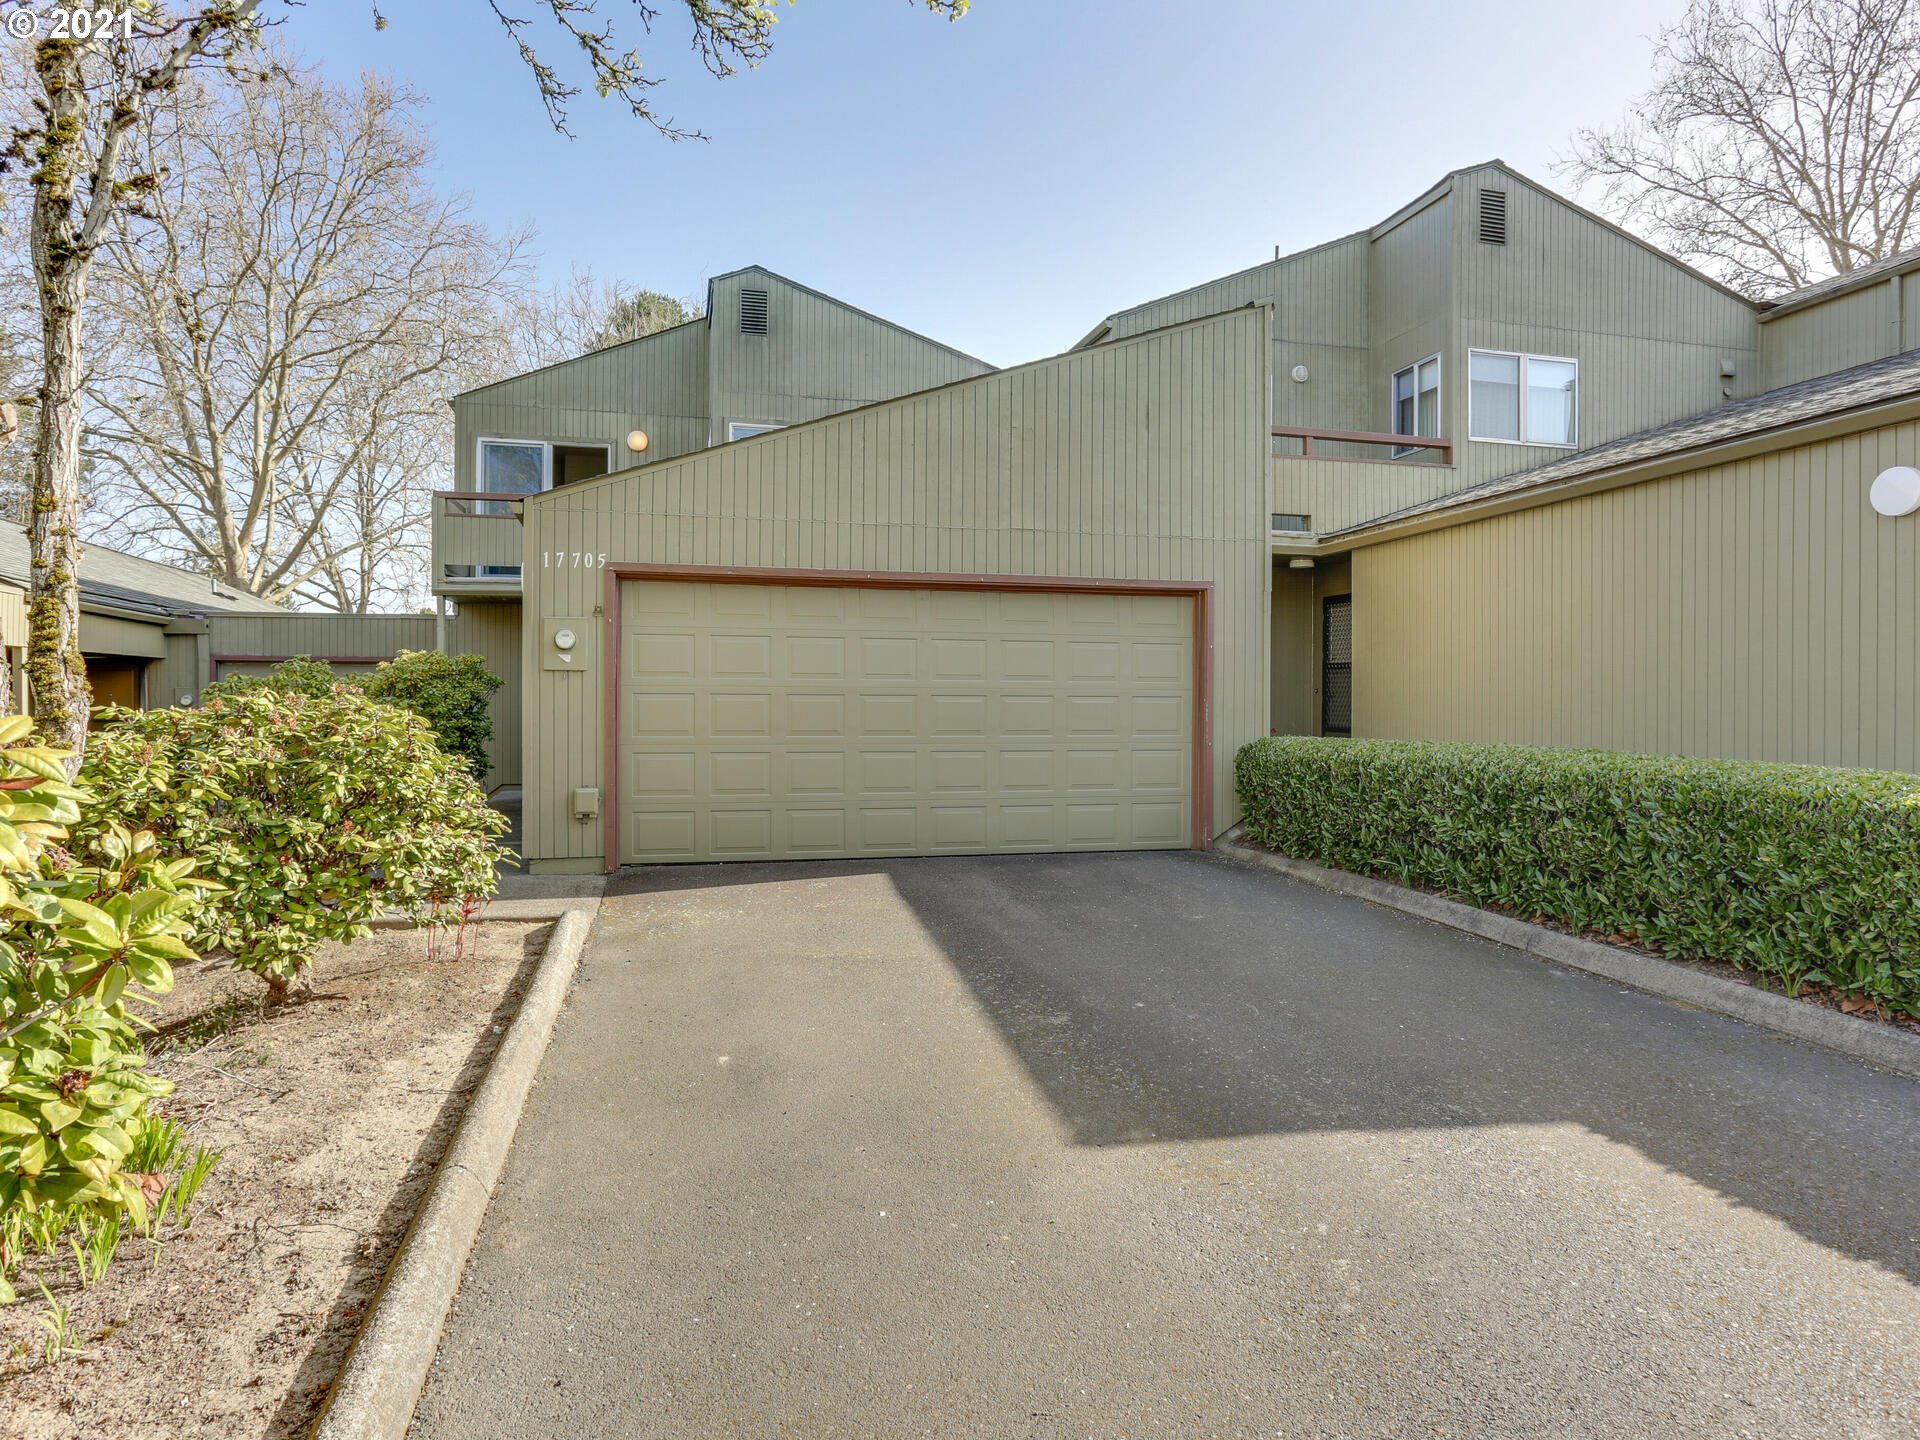 17705 NW ROLLING HILL LN (1 of 32)